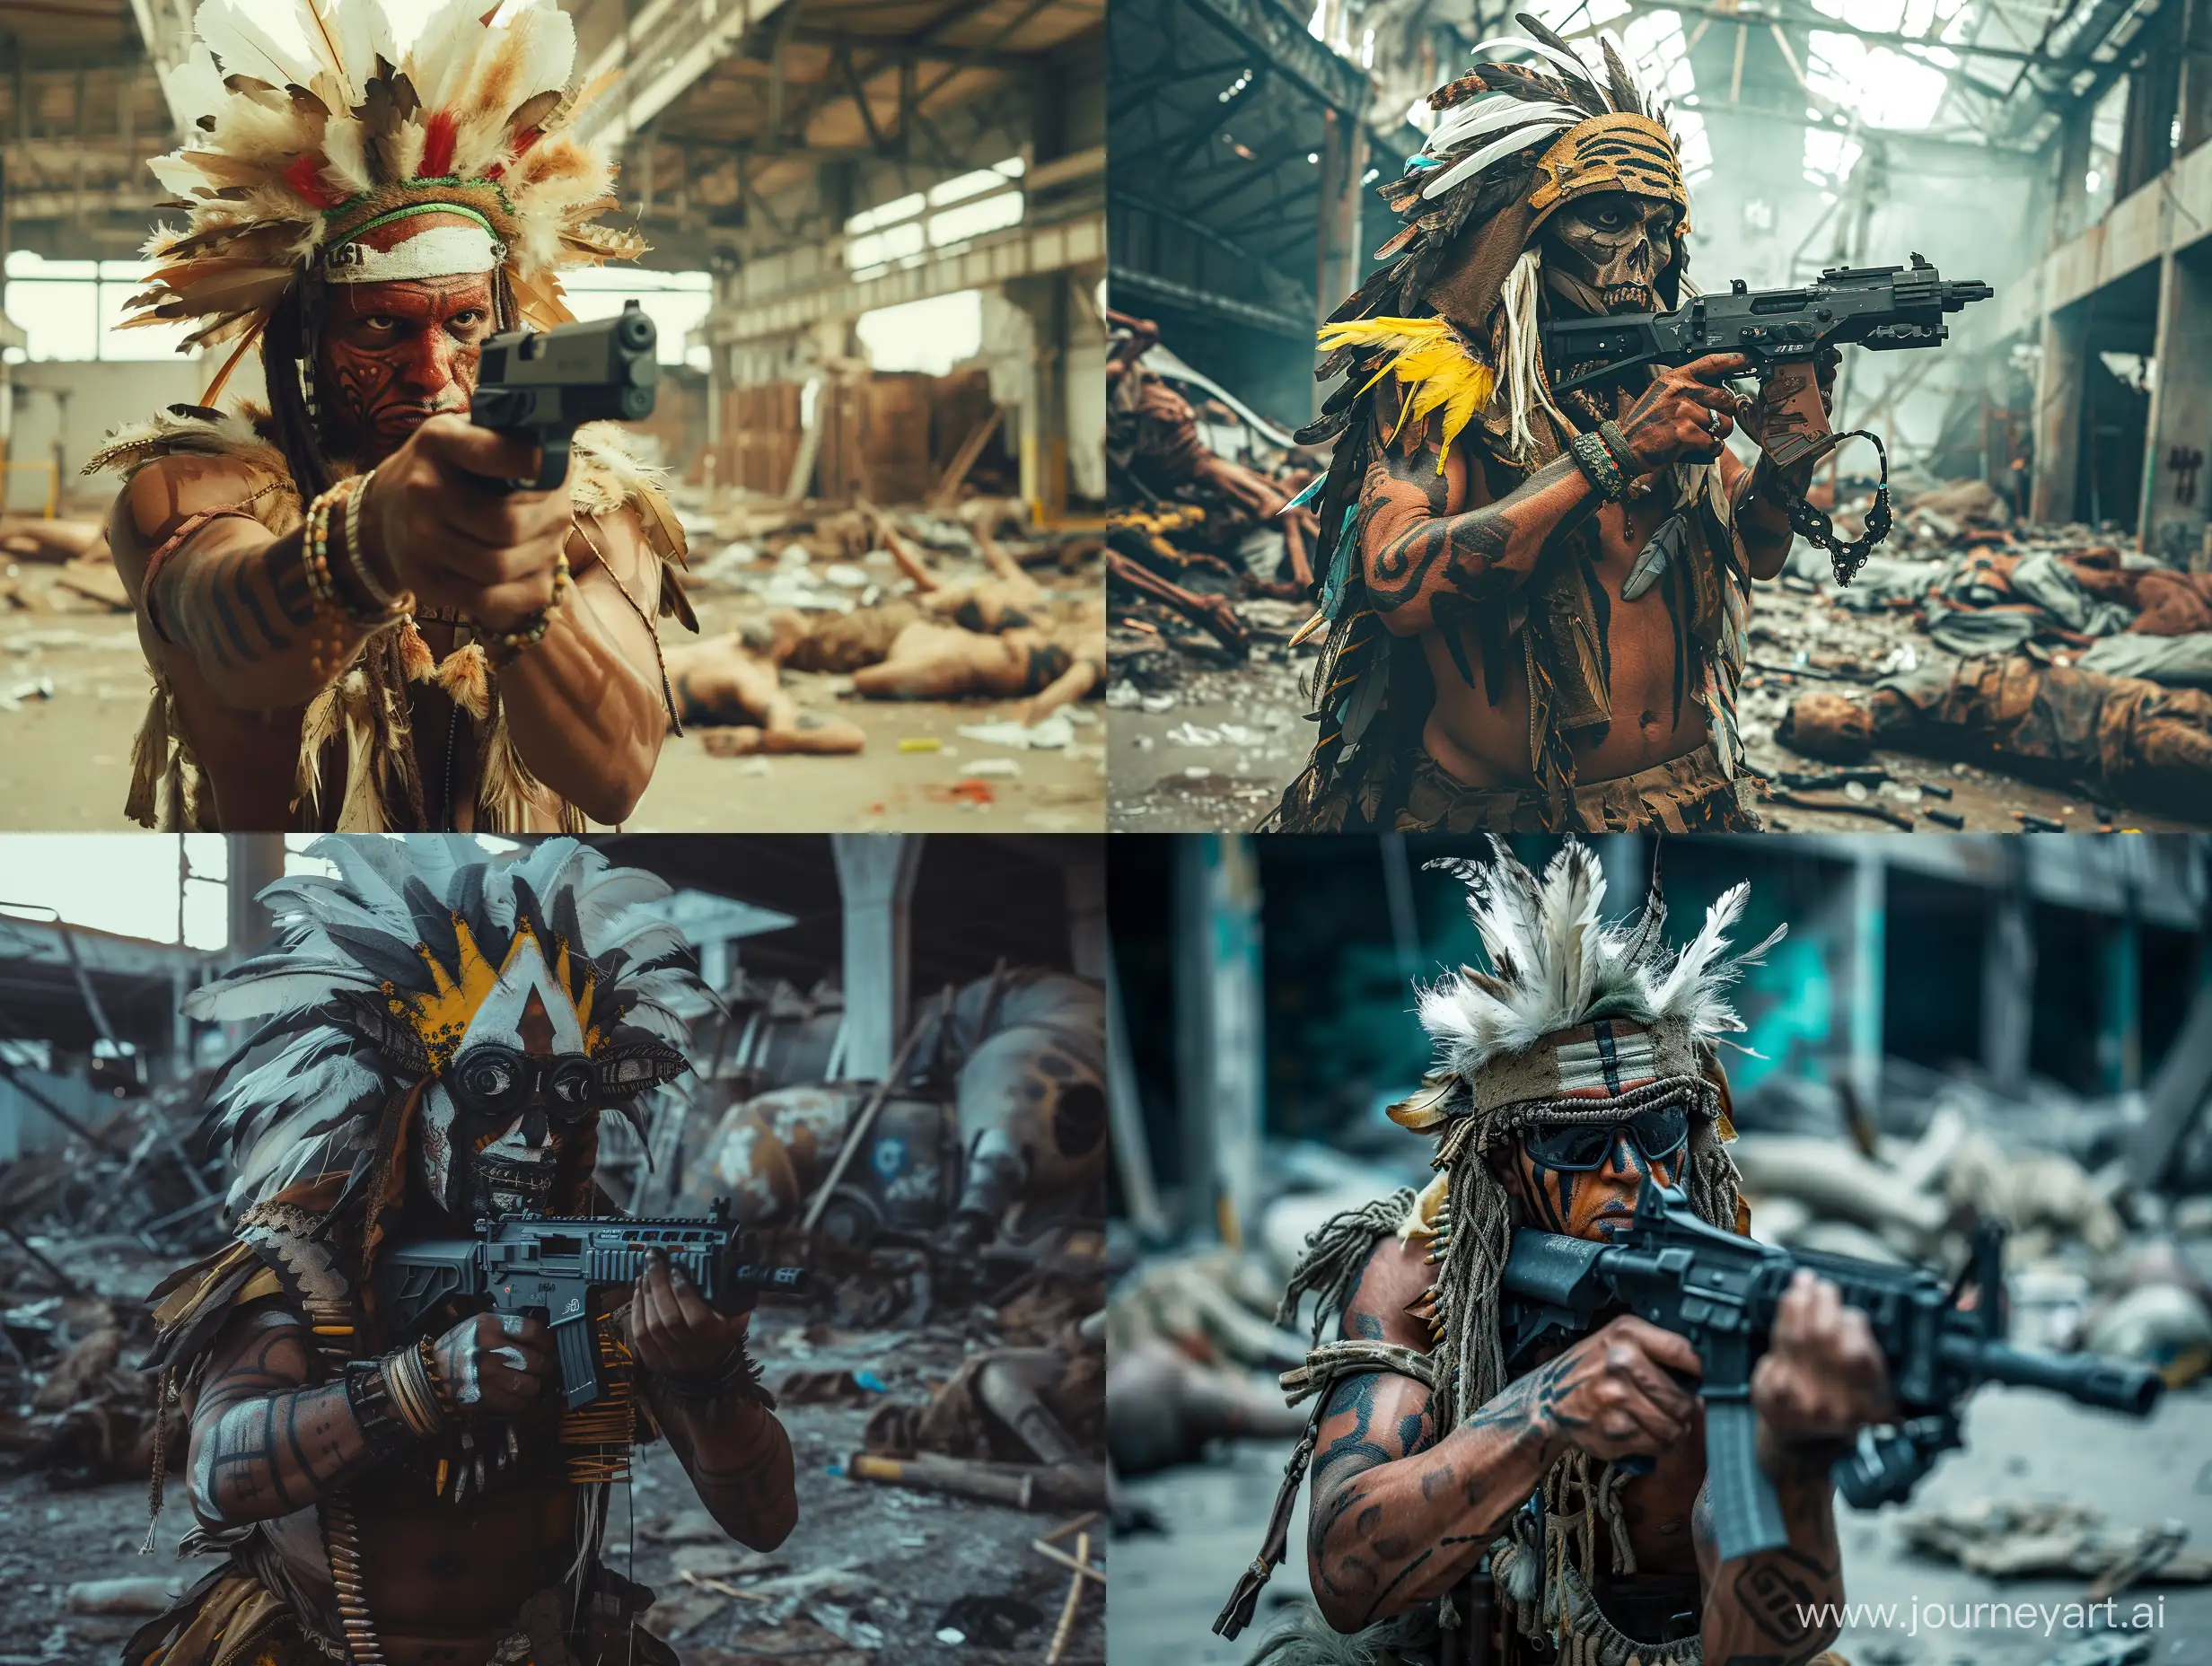 Aboriginal-Warrior-STALCRAFT-with-SIG-MPX-amid-Fallen-Bandits-in-Army-Warehouses